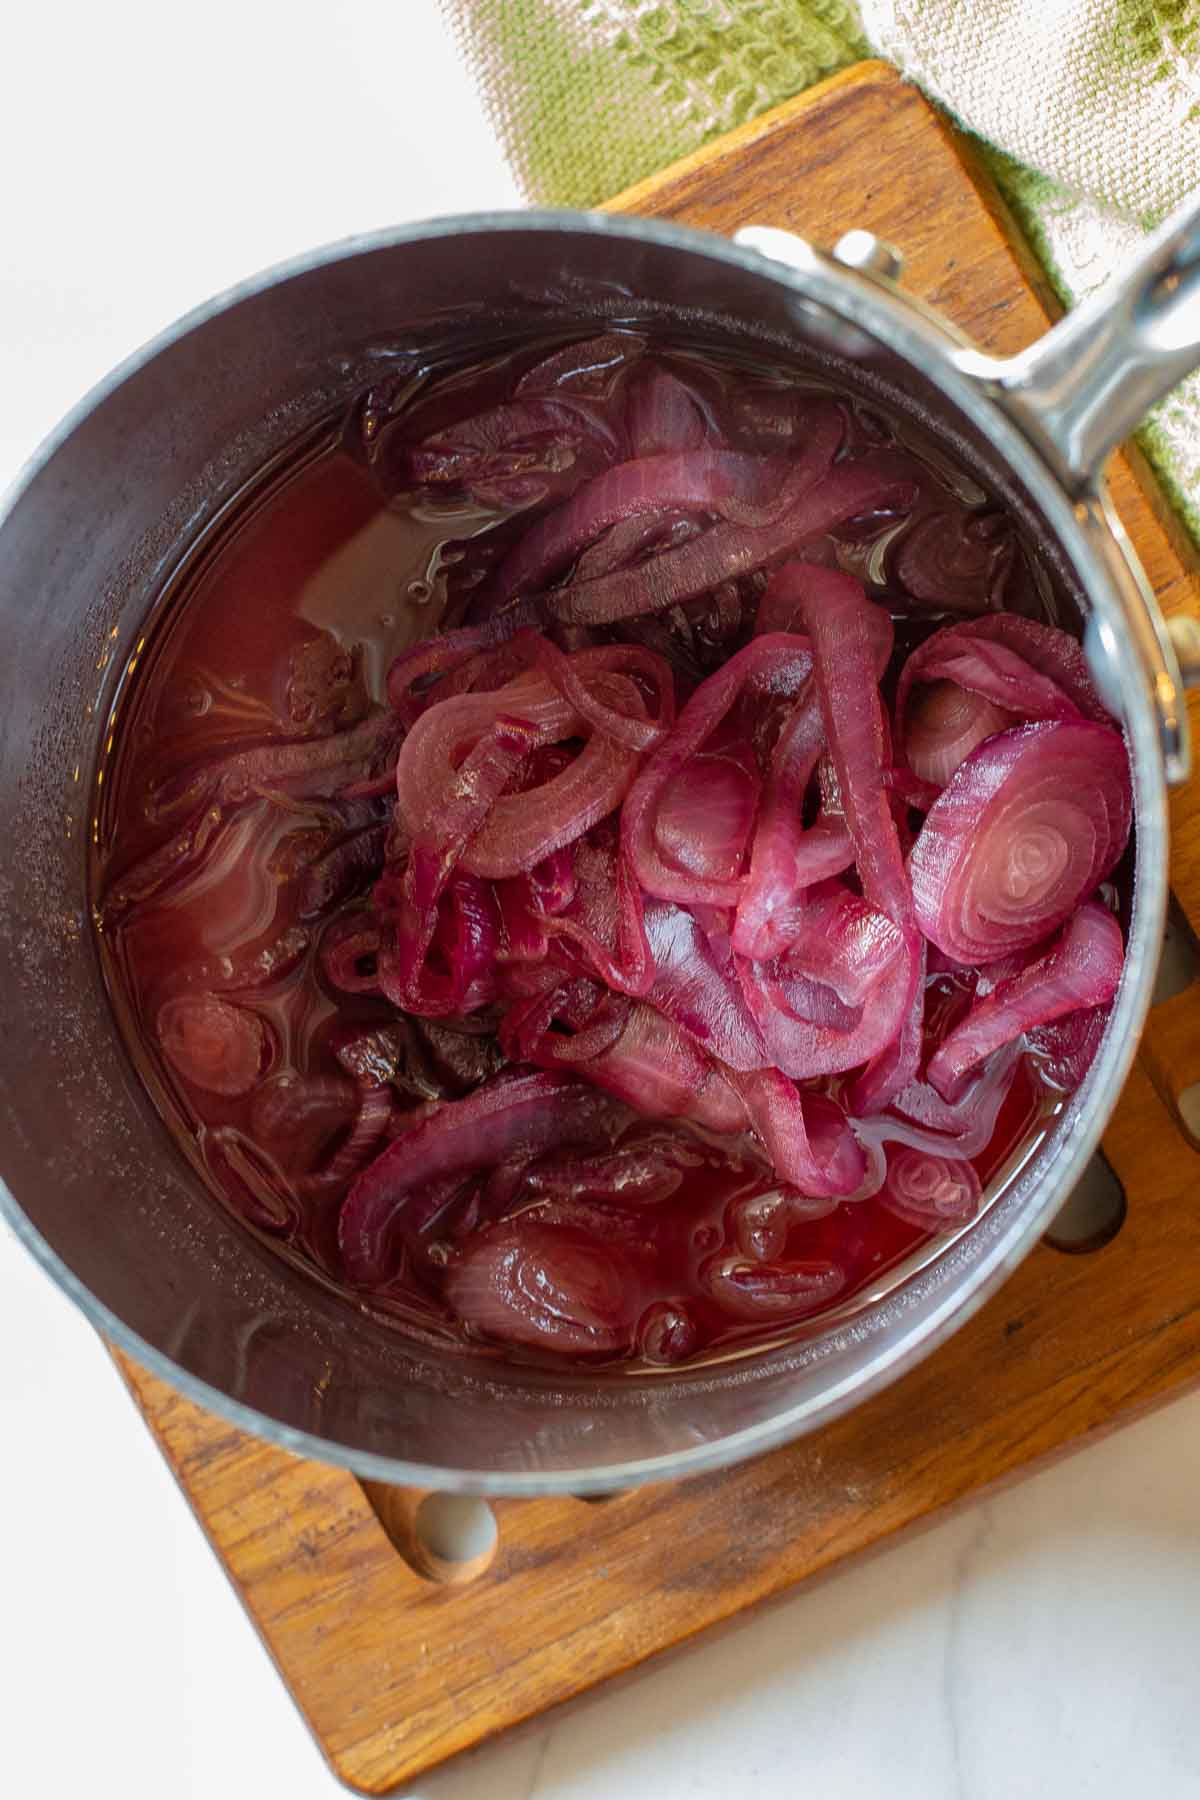 Red onions cooking in red wine vinegar to make red onion marmalade.